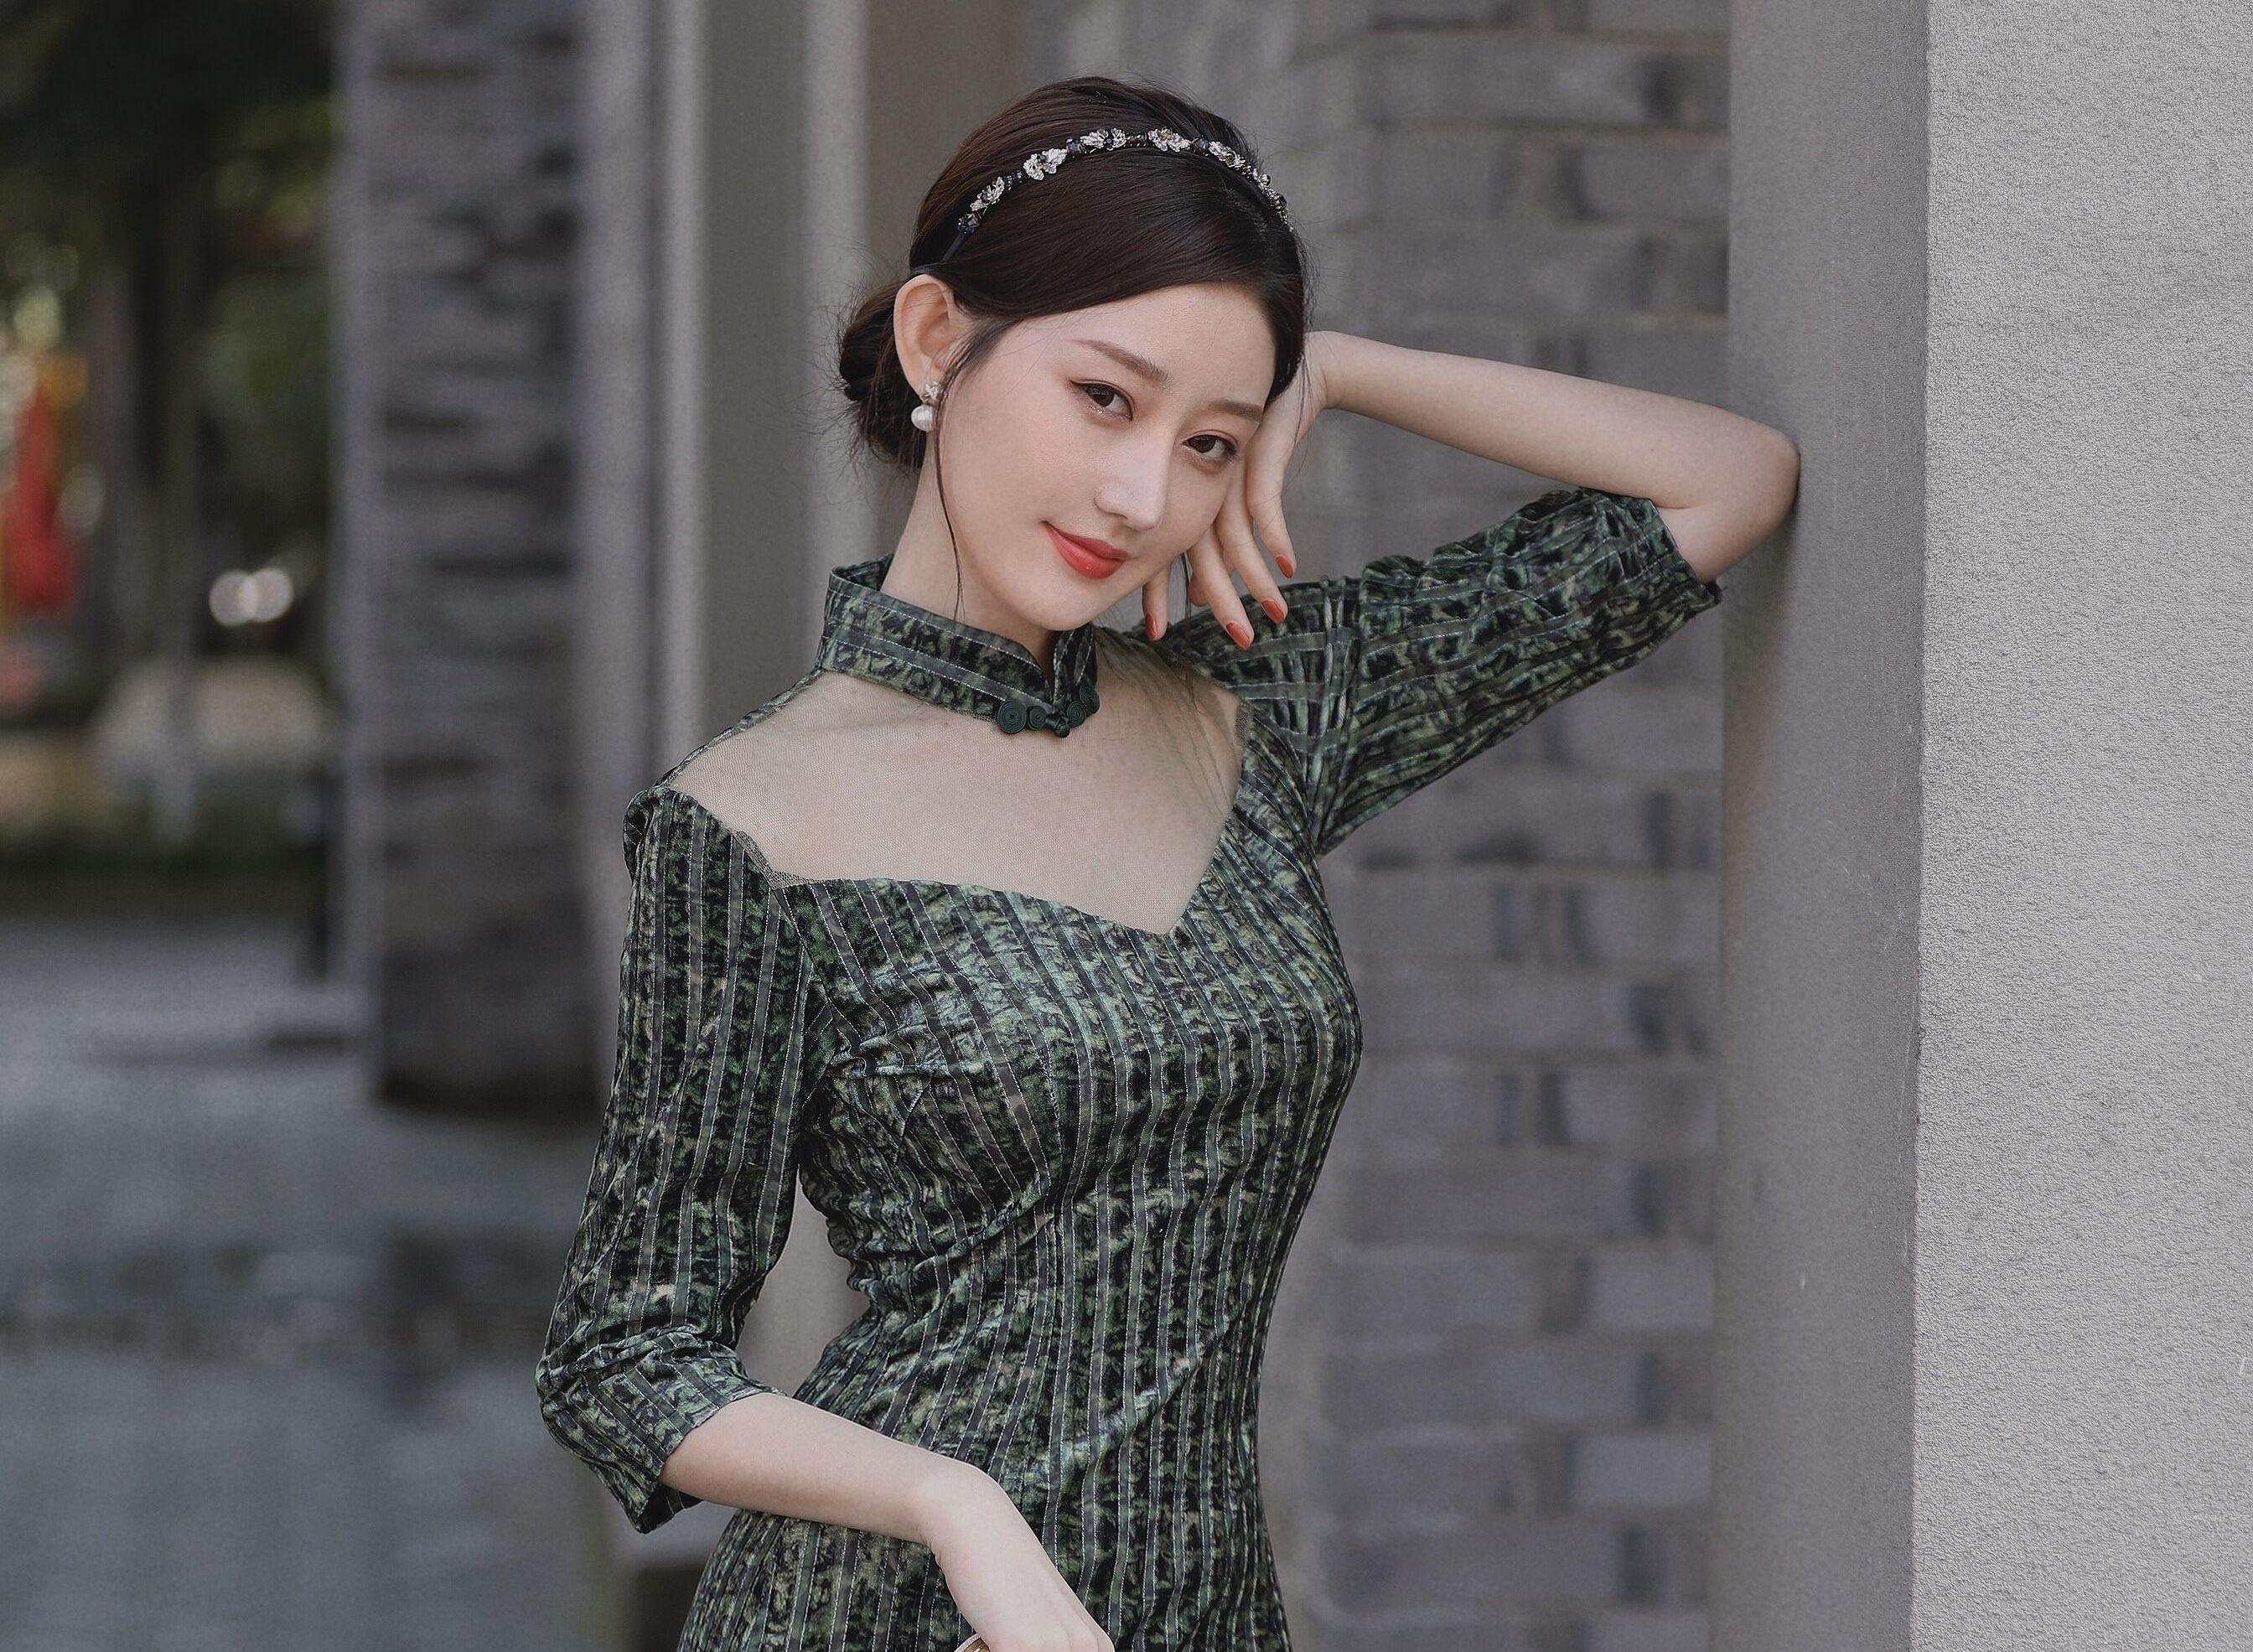 Who Can Resist Asian Hot Ladies When They Wear The Feminine Cheongsam